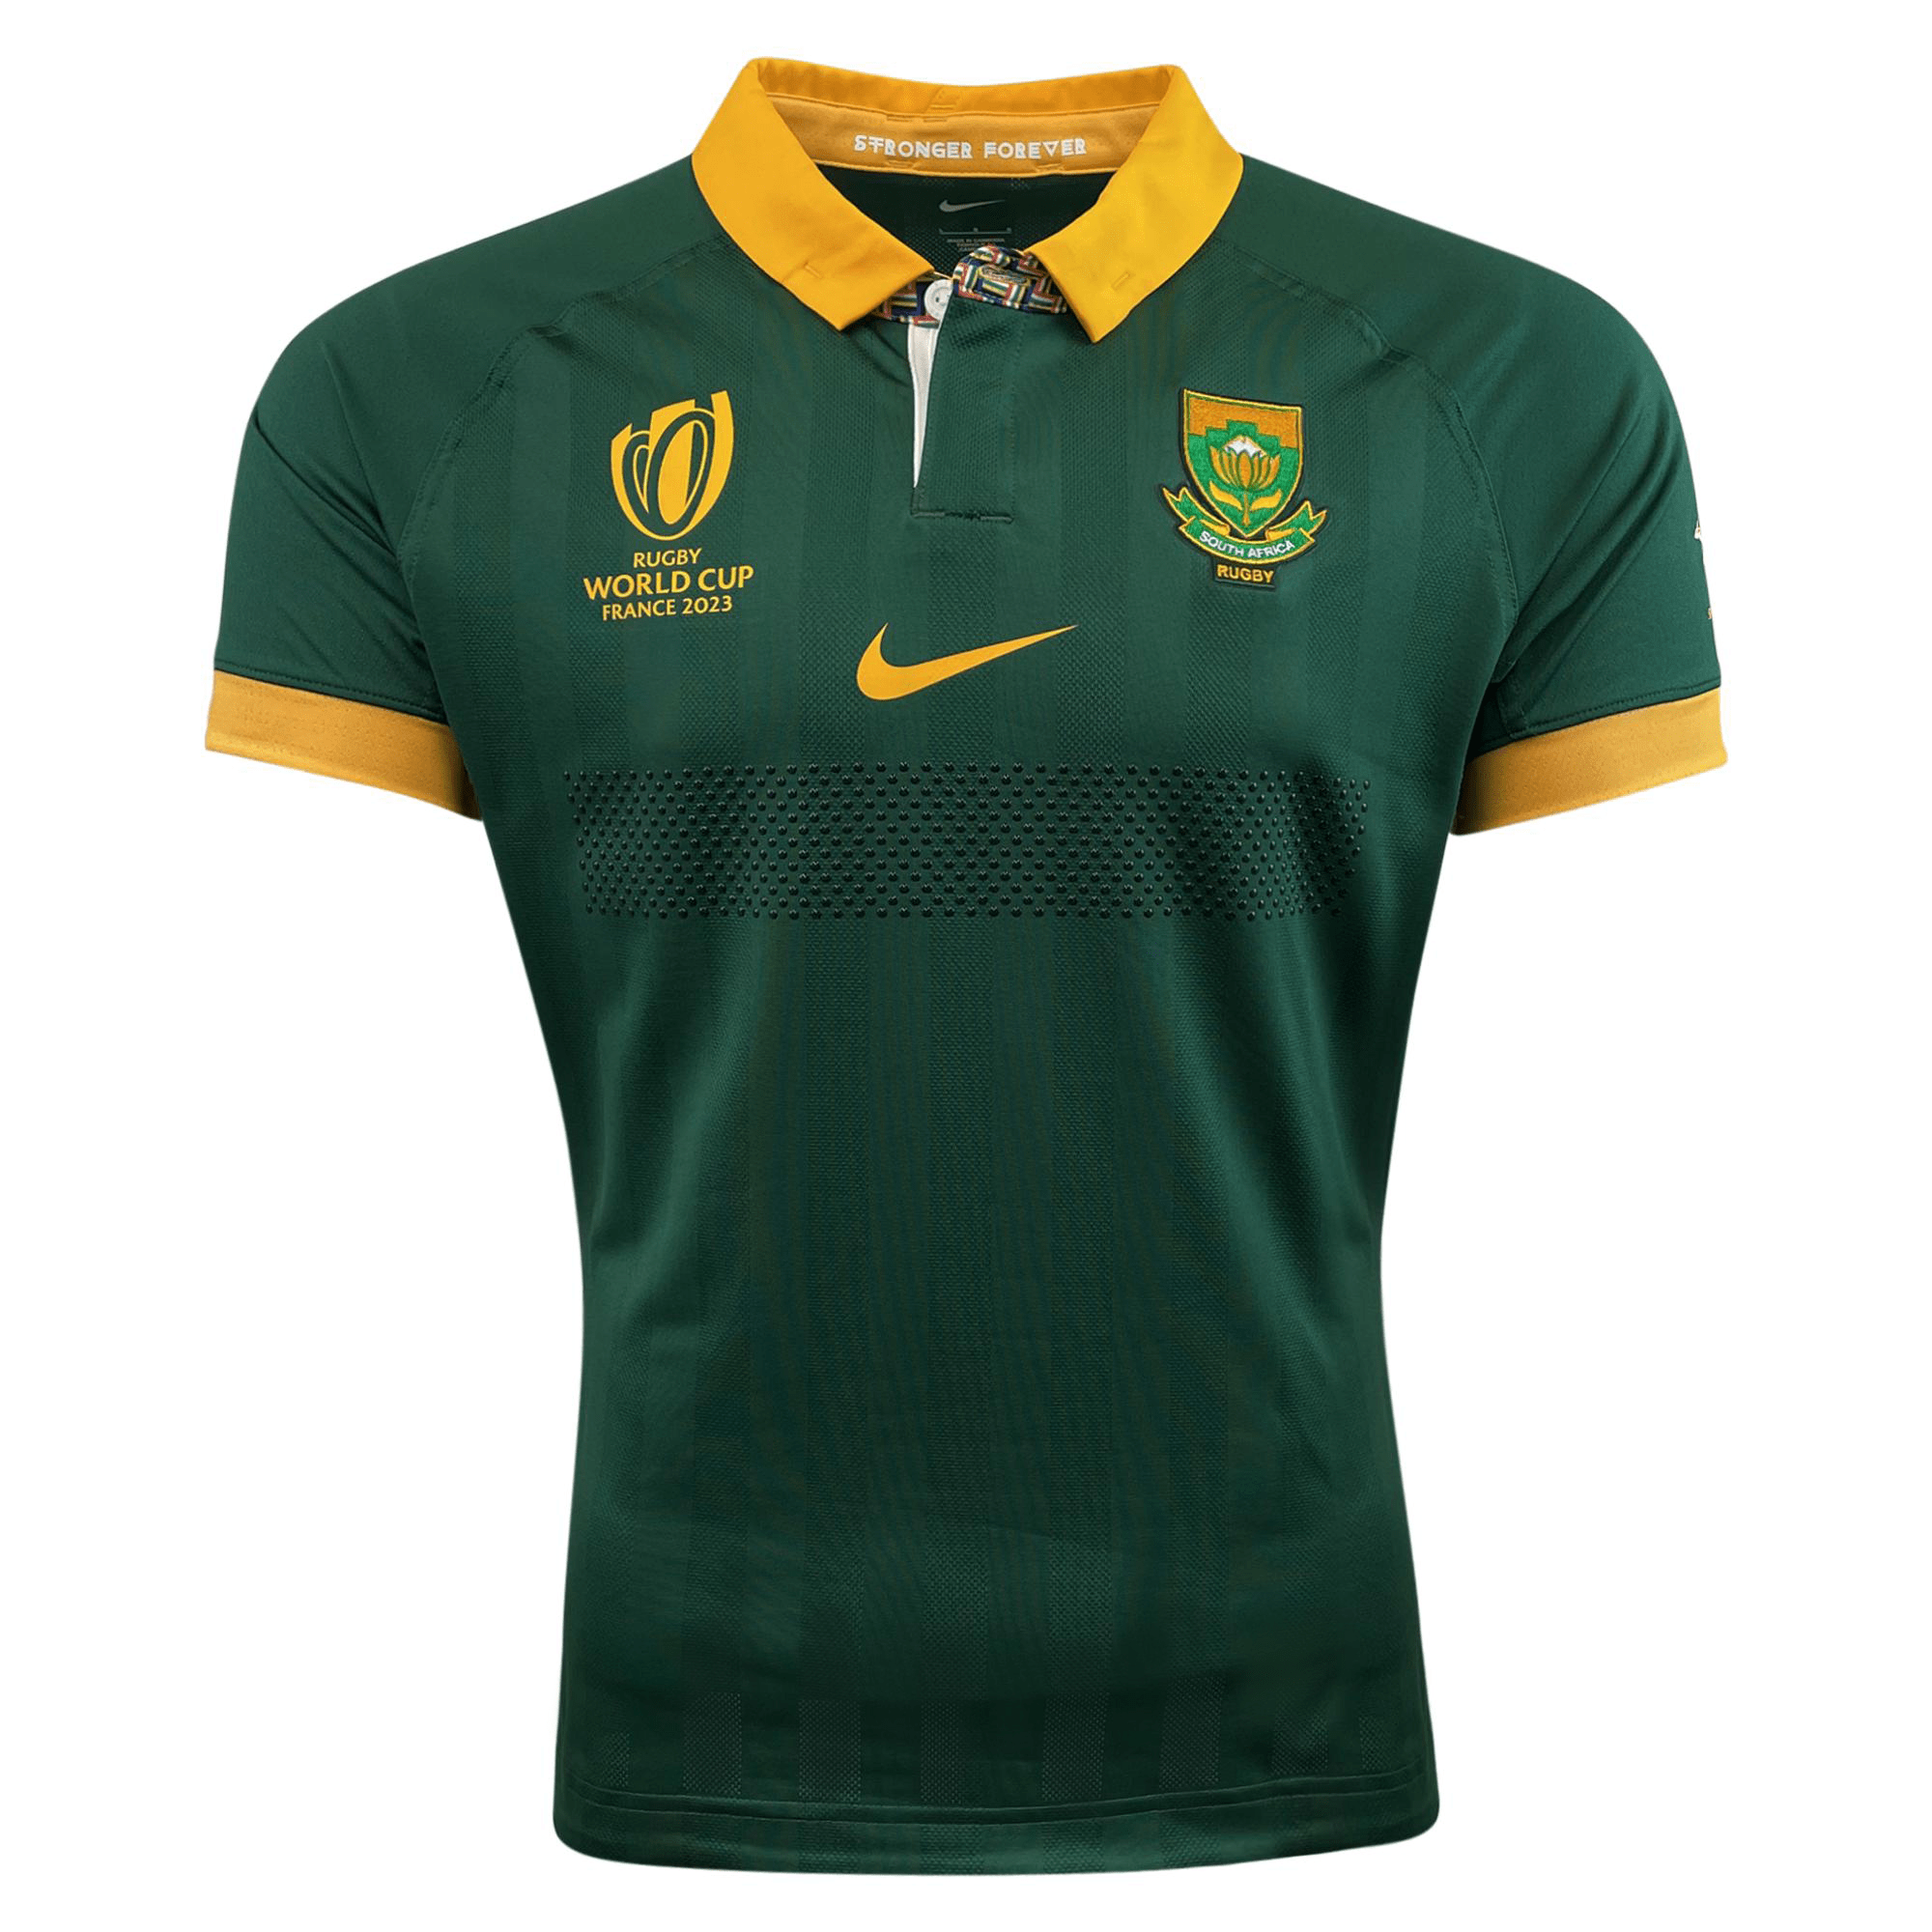 Springboks Rugby World Cup 2023 Match Home Jersey 2023 by Nike - Green